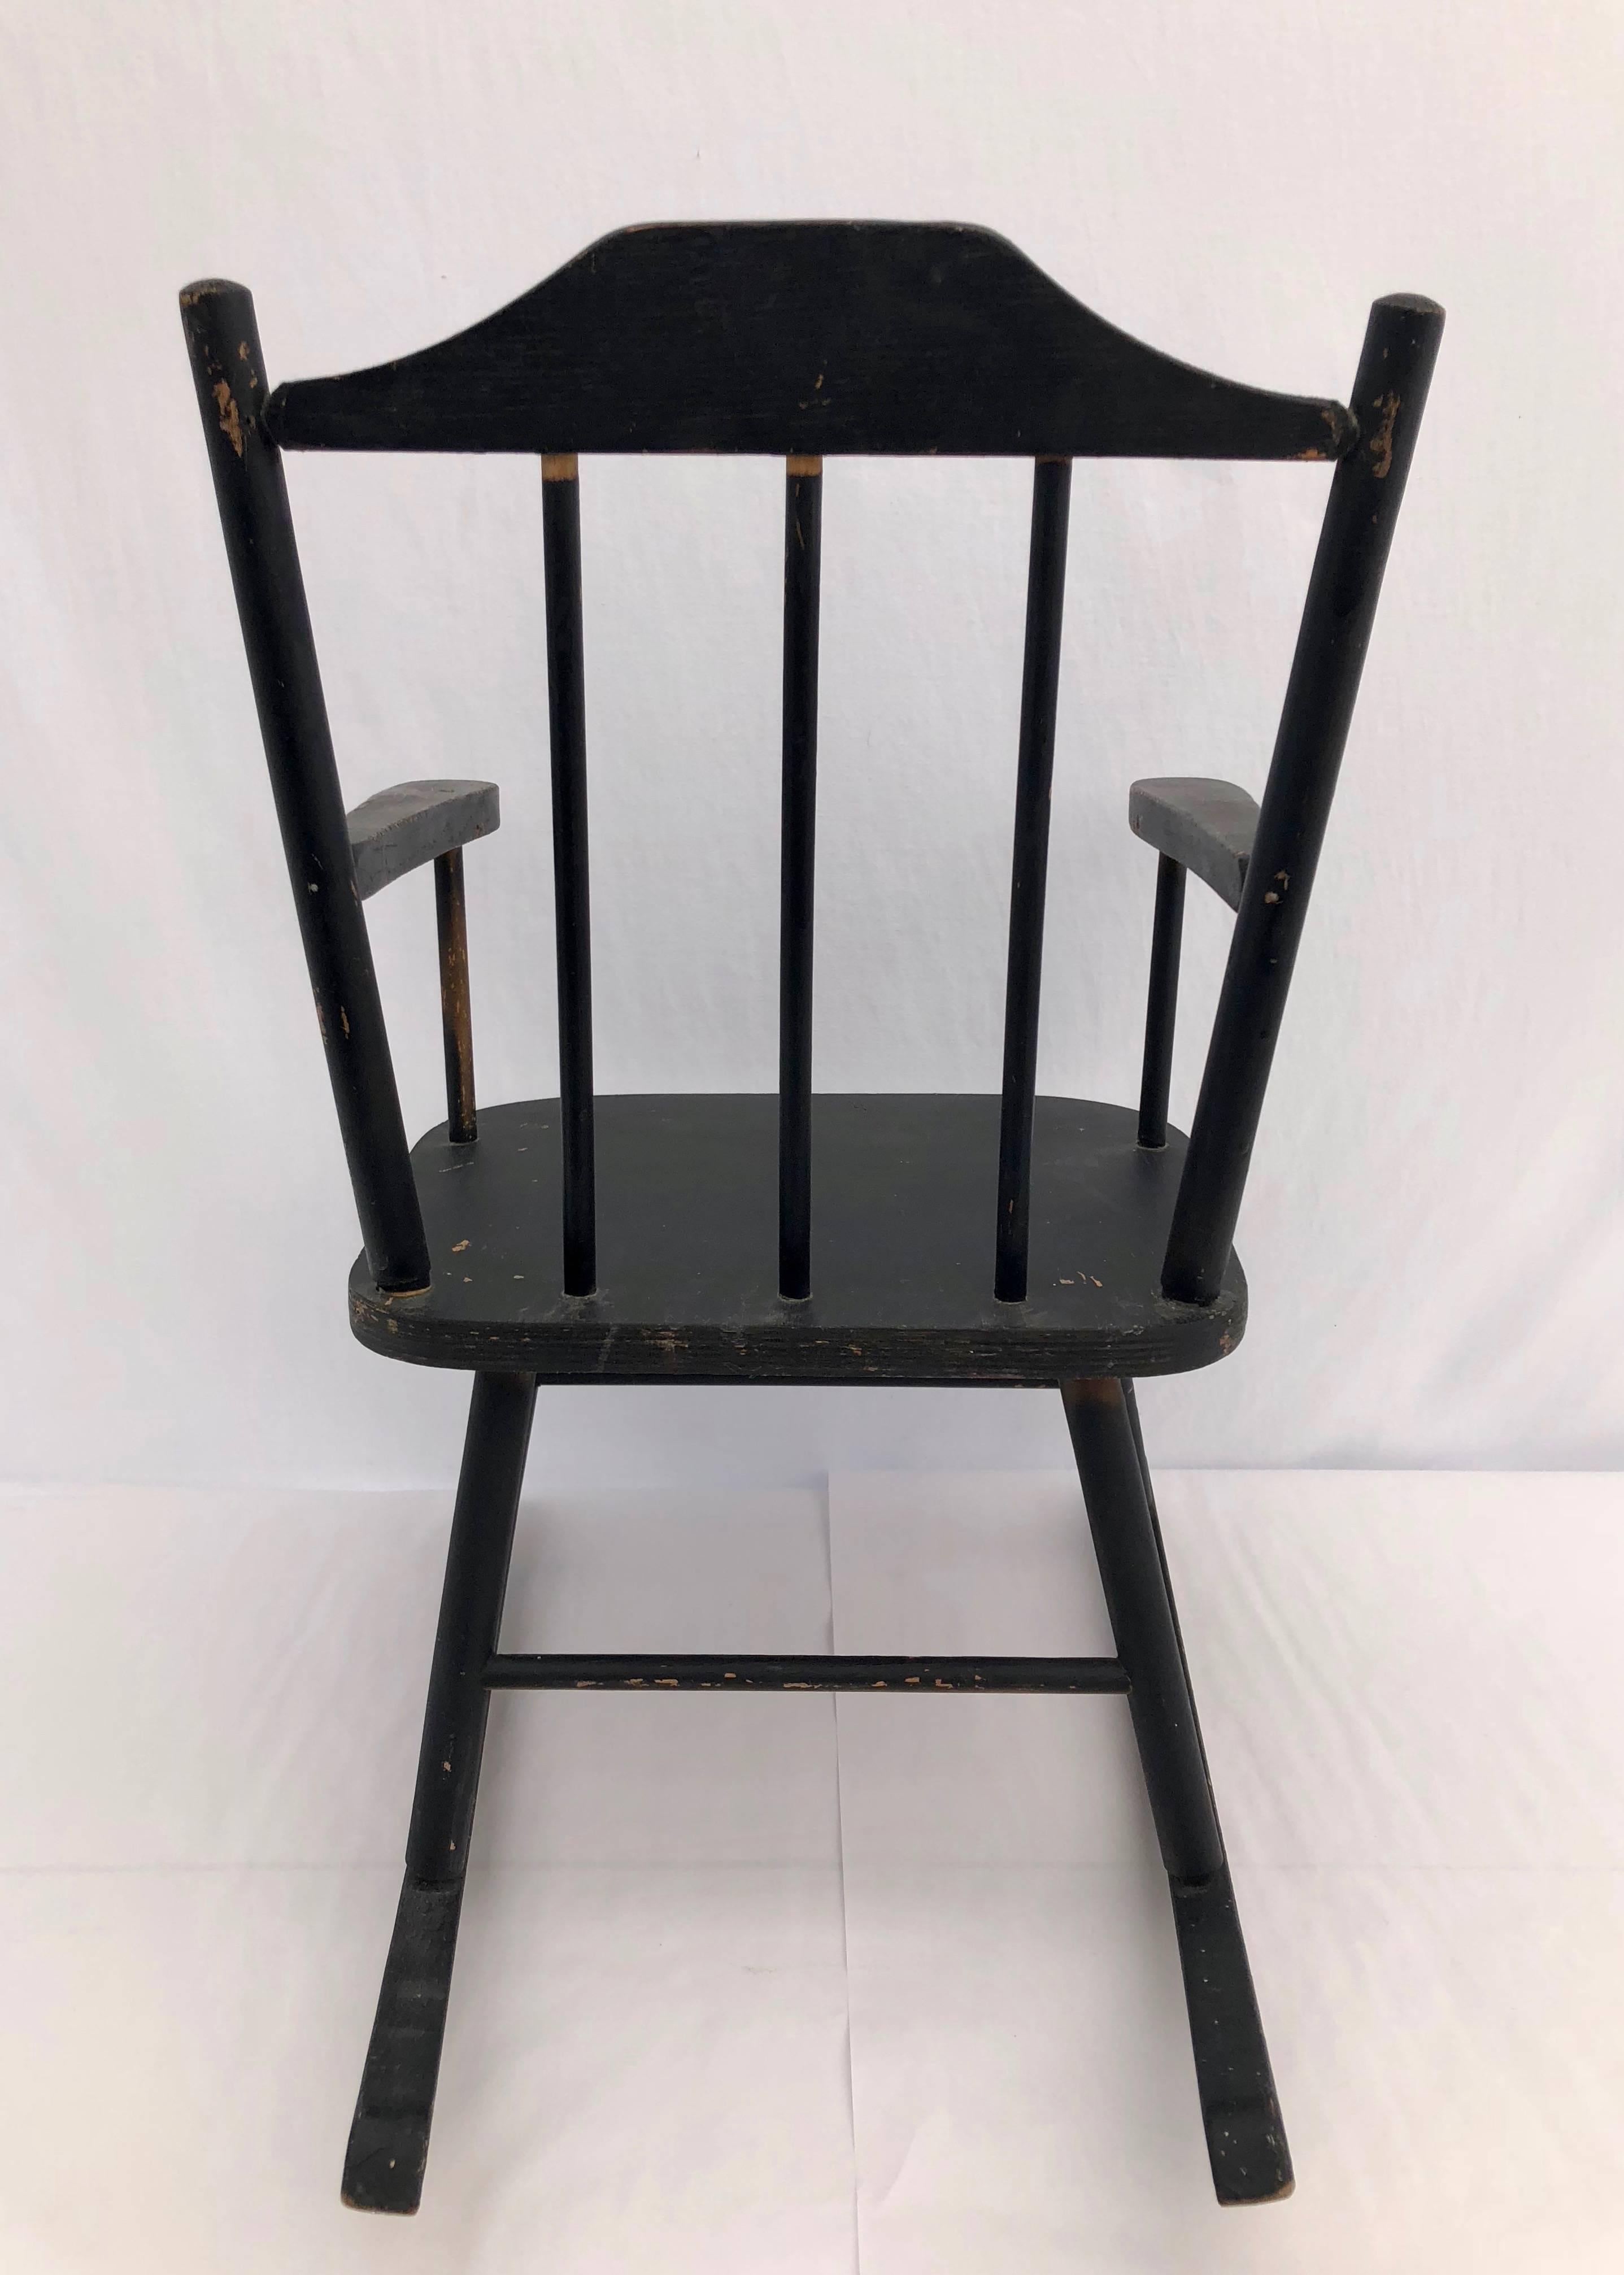 spindle back chair